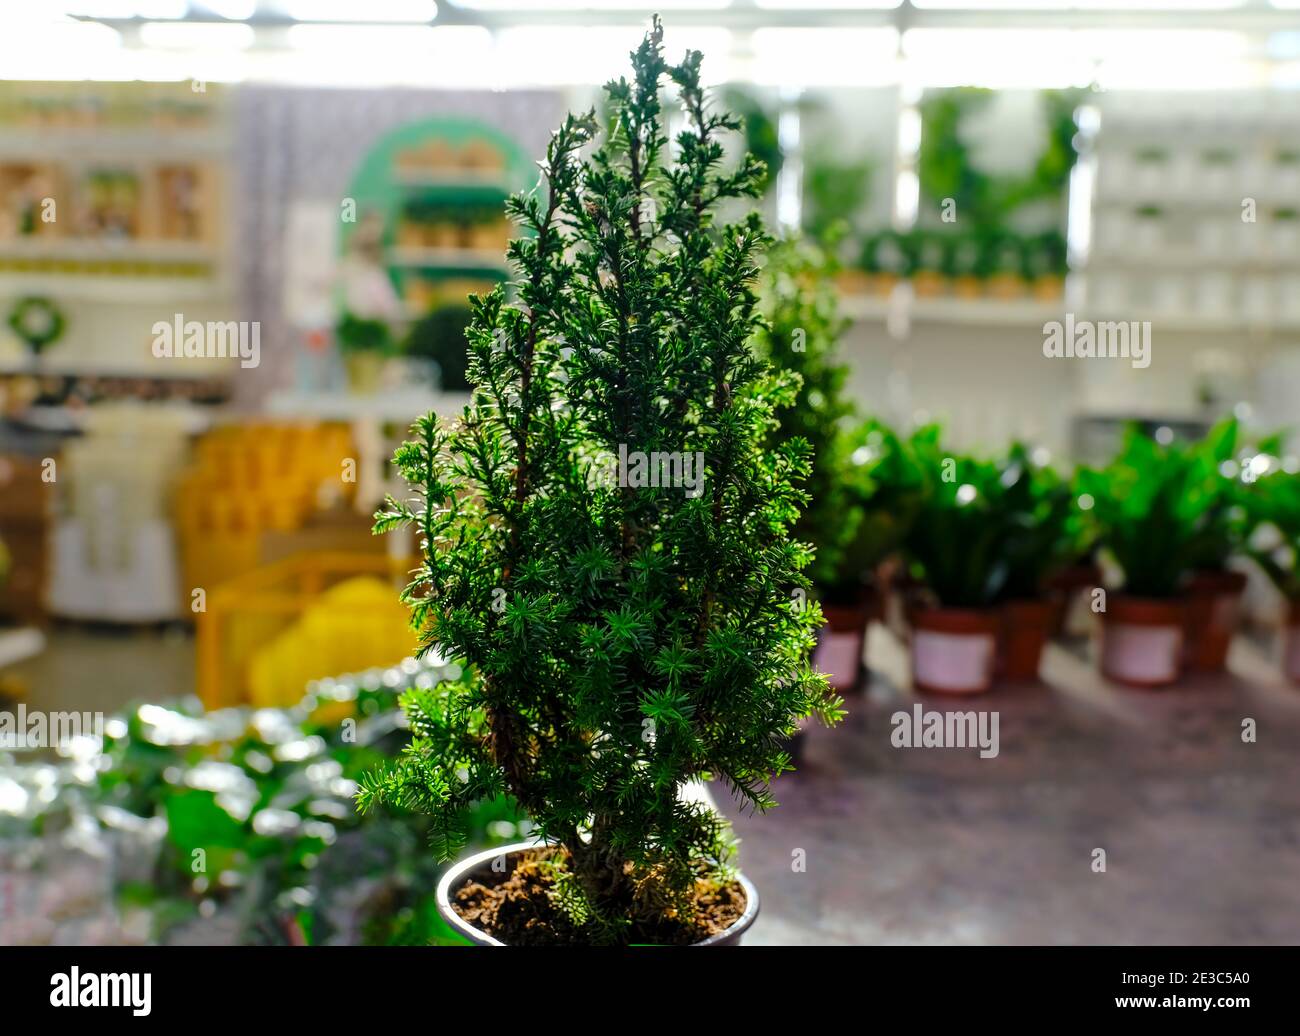 evergreen plants-Chamaecyparis cypress trees in pots on the shelve at garden shop Stock Photo